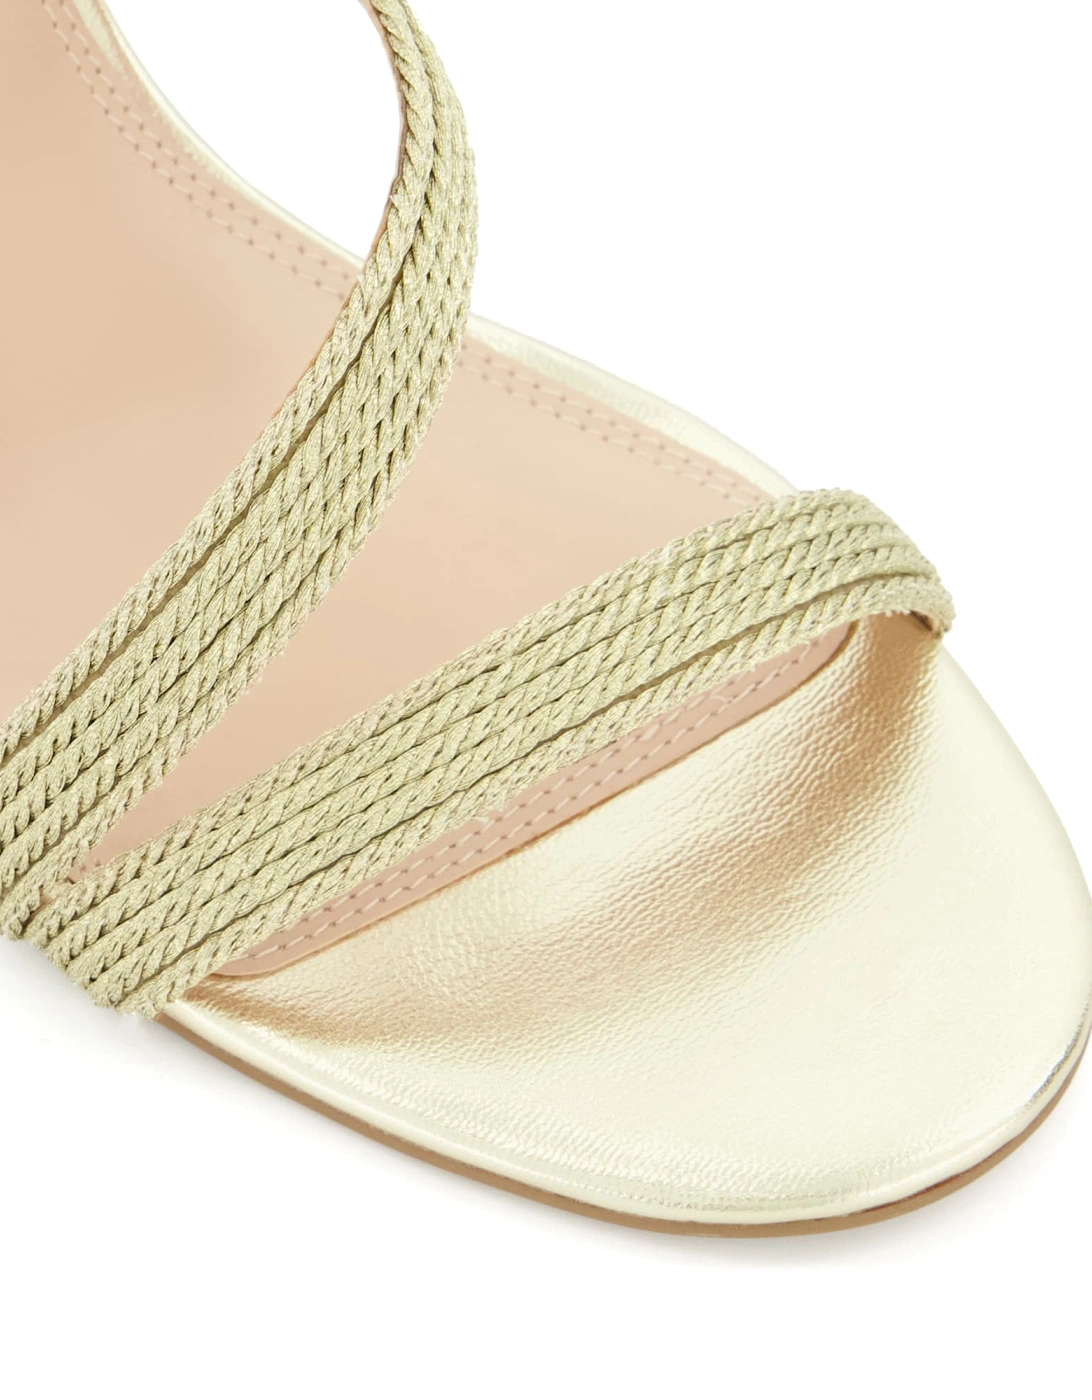 Ladies Kaia - Strappy Woven-Wedge Sandals